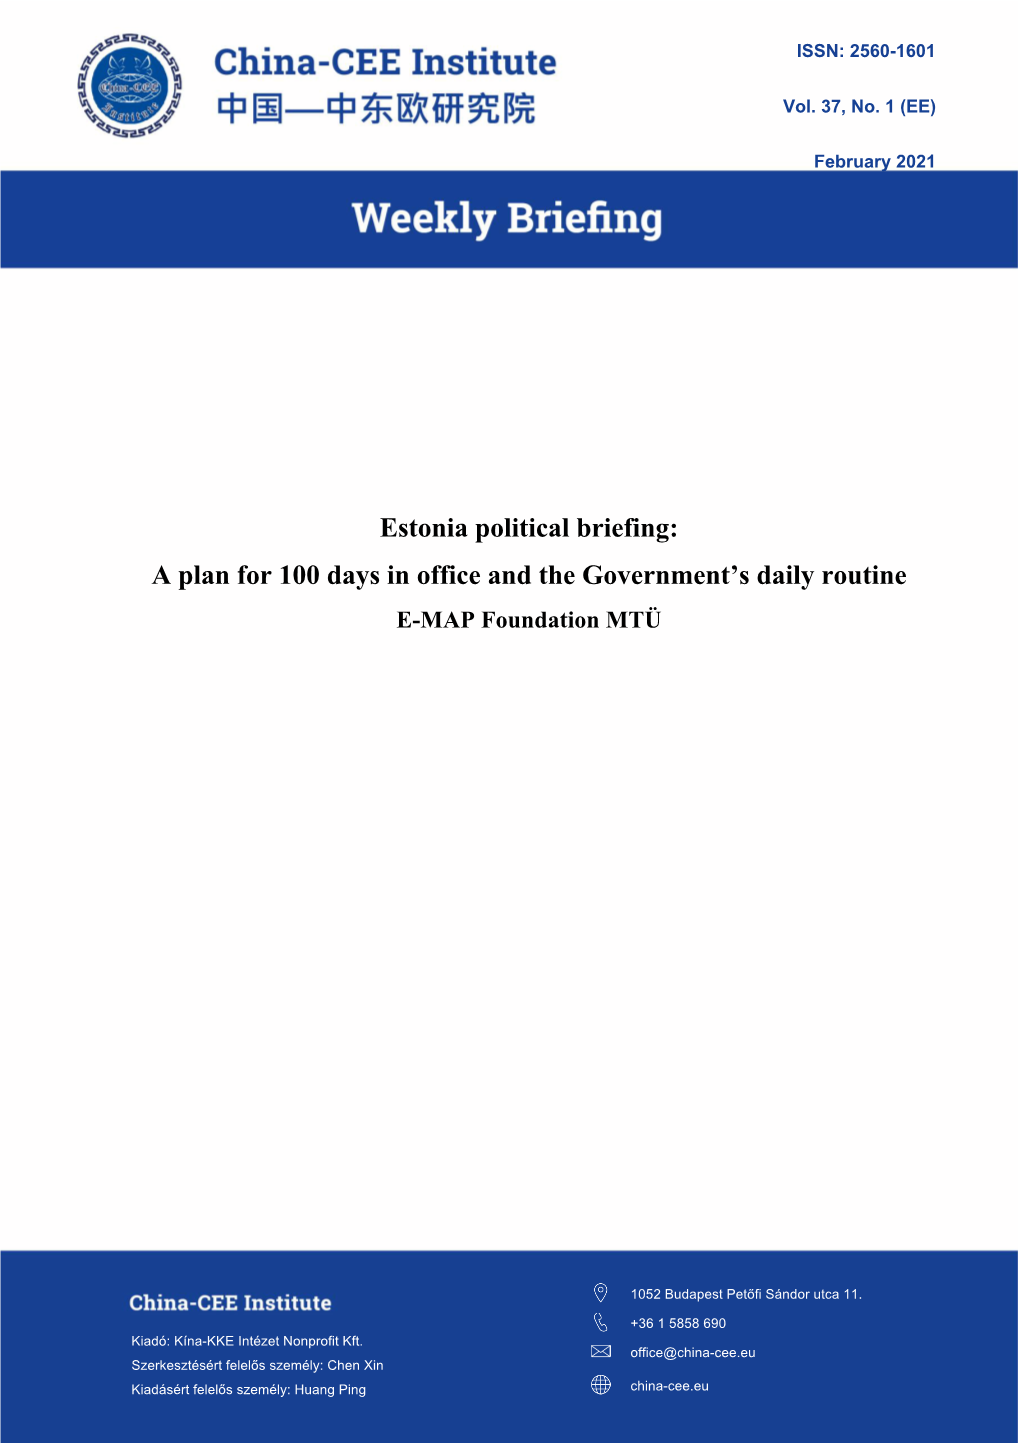 Estonia Political Briefing: a Plan for 100 Days in Office and the Government's Daily Routine